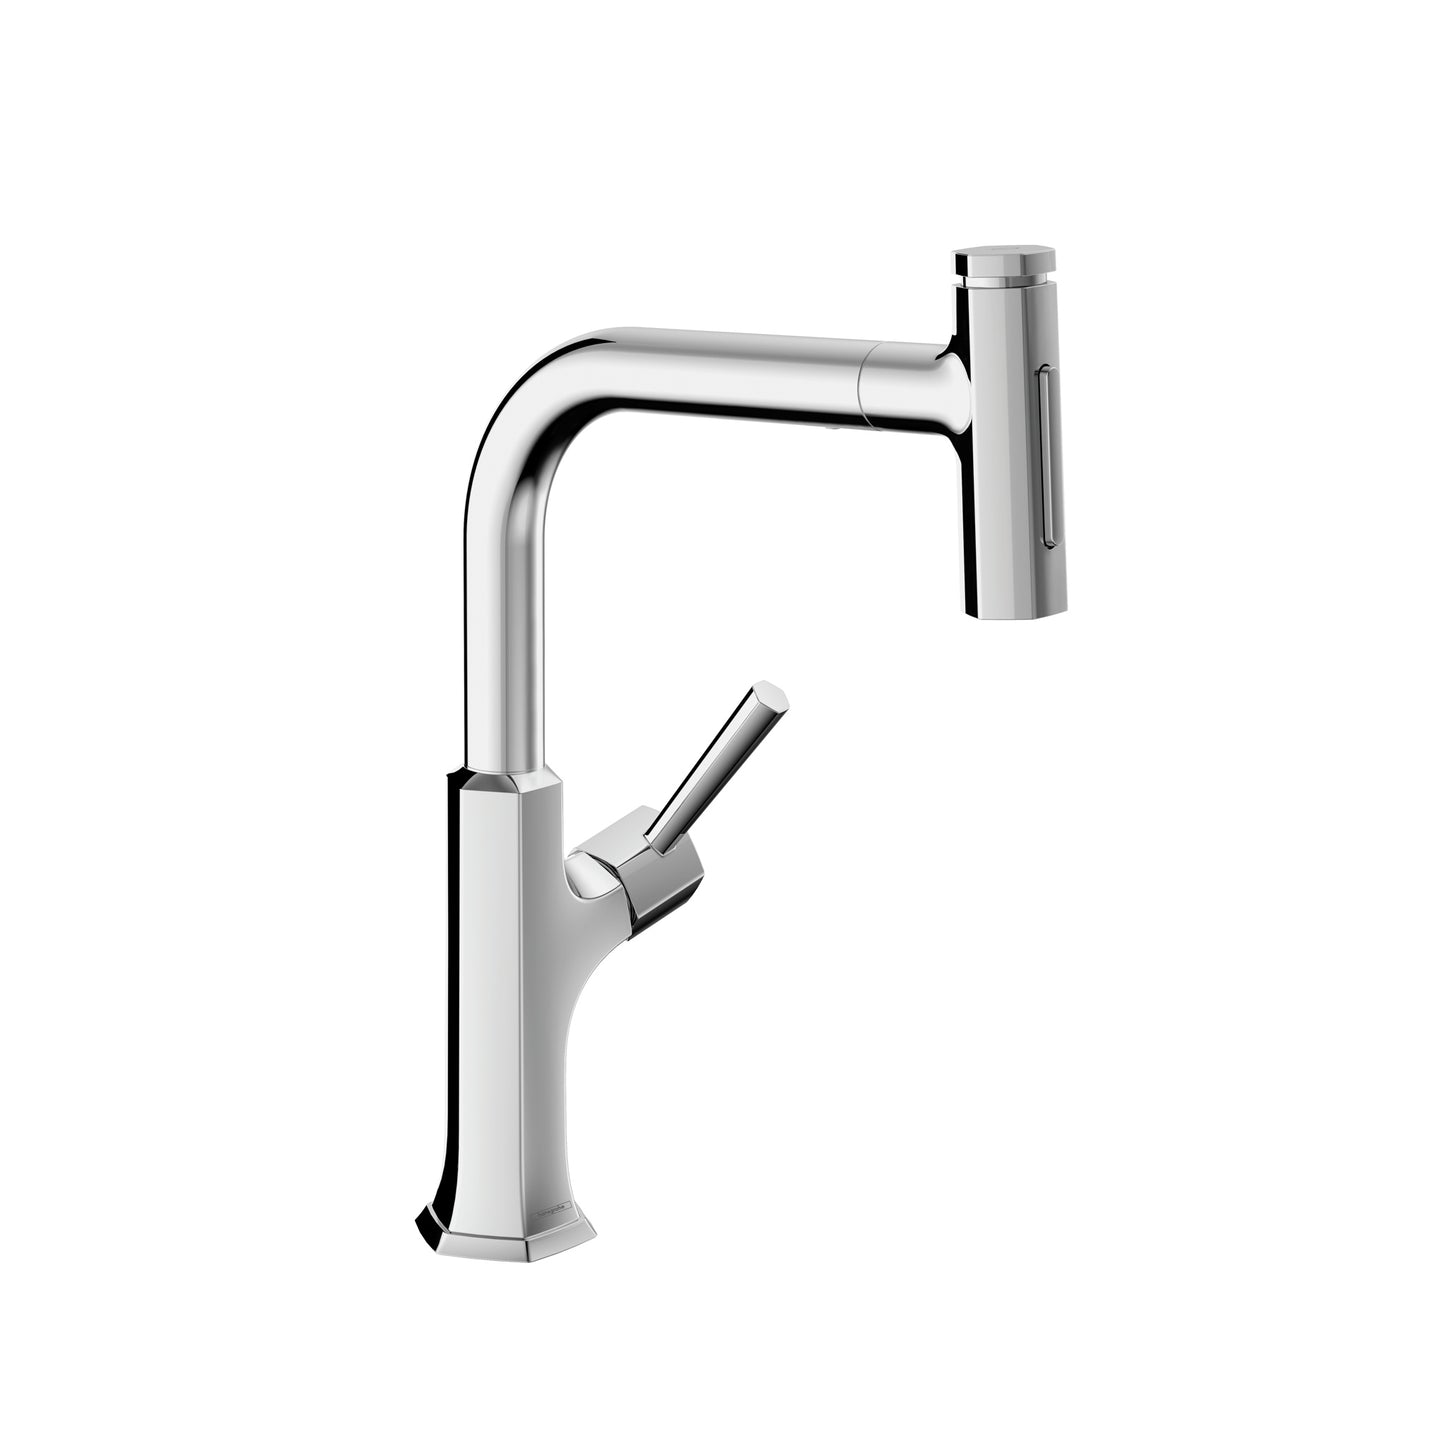 HANSGROHE 04828000 Chrome Locarno Transitional Kitchen Faucet 1.75 GPM